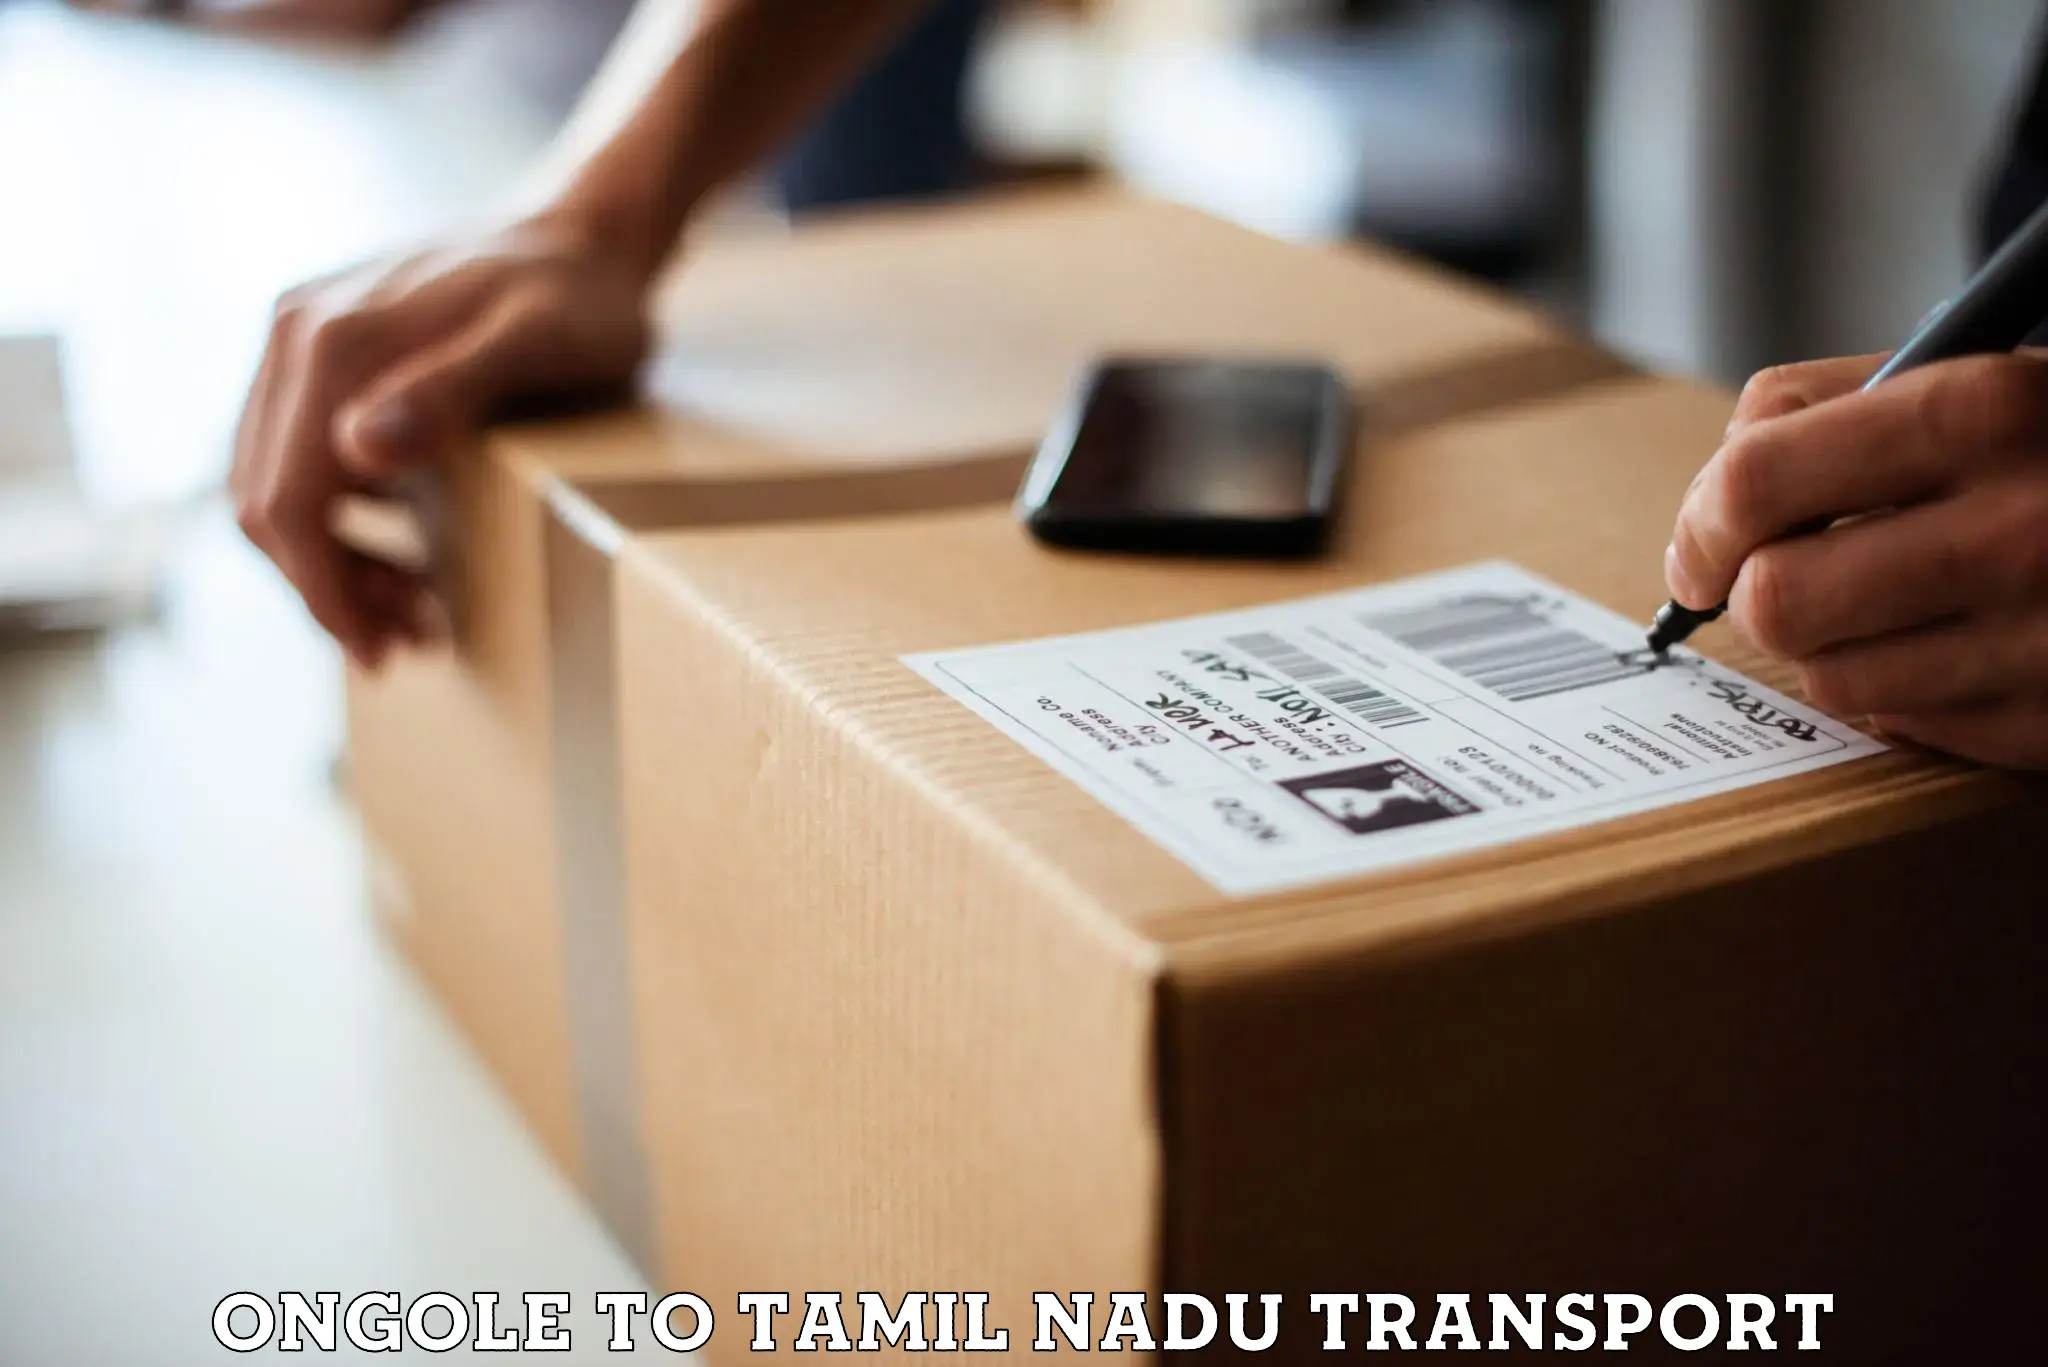 Cargo transport services Ongole to Cuddalore